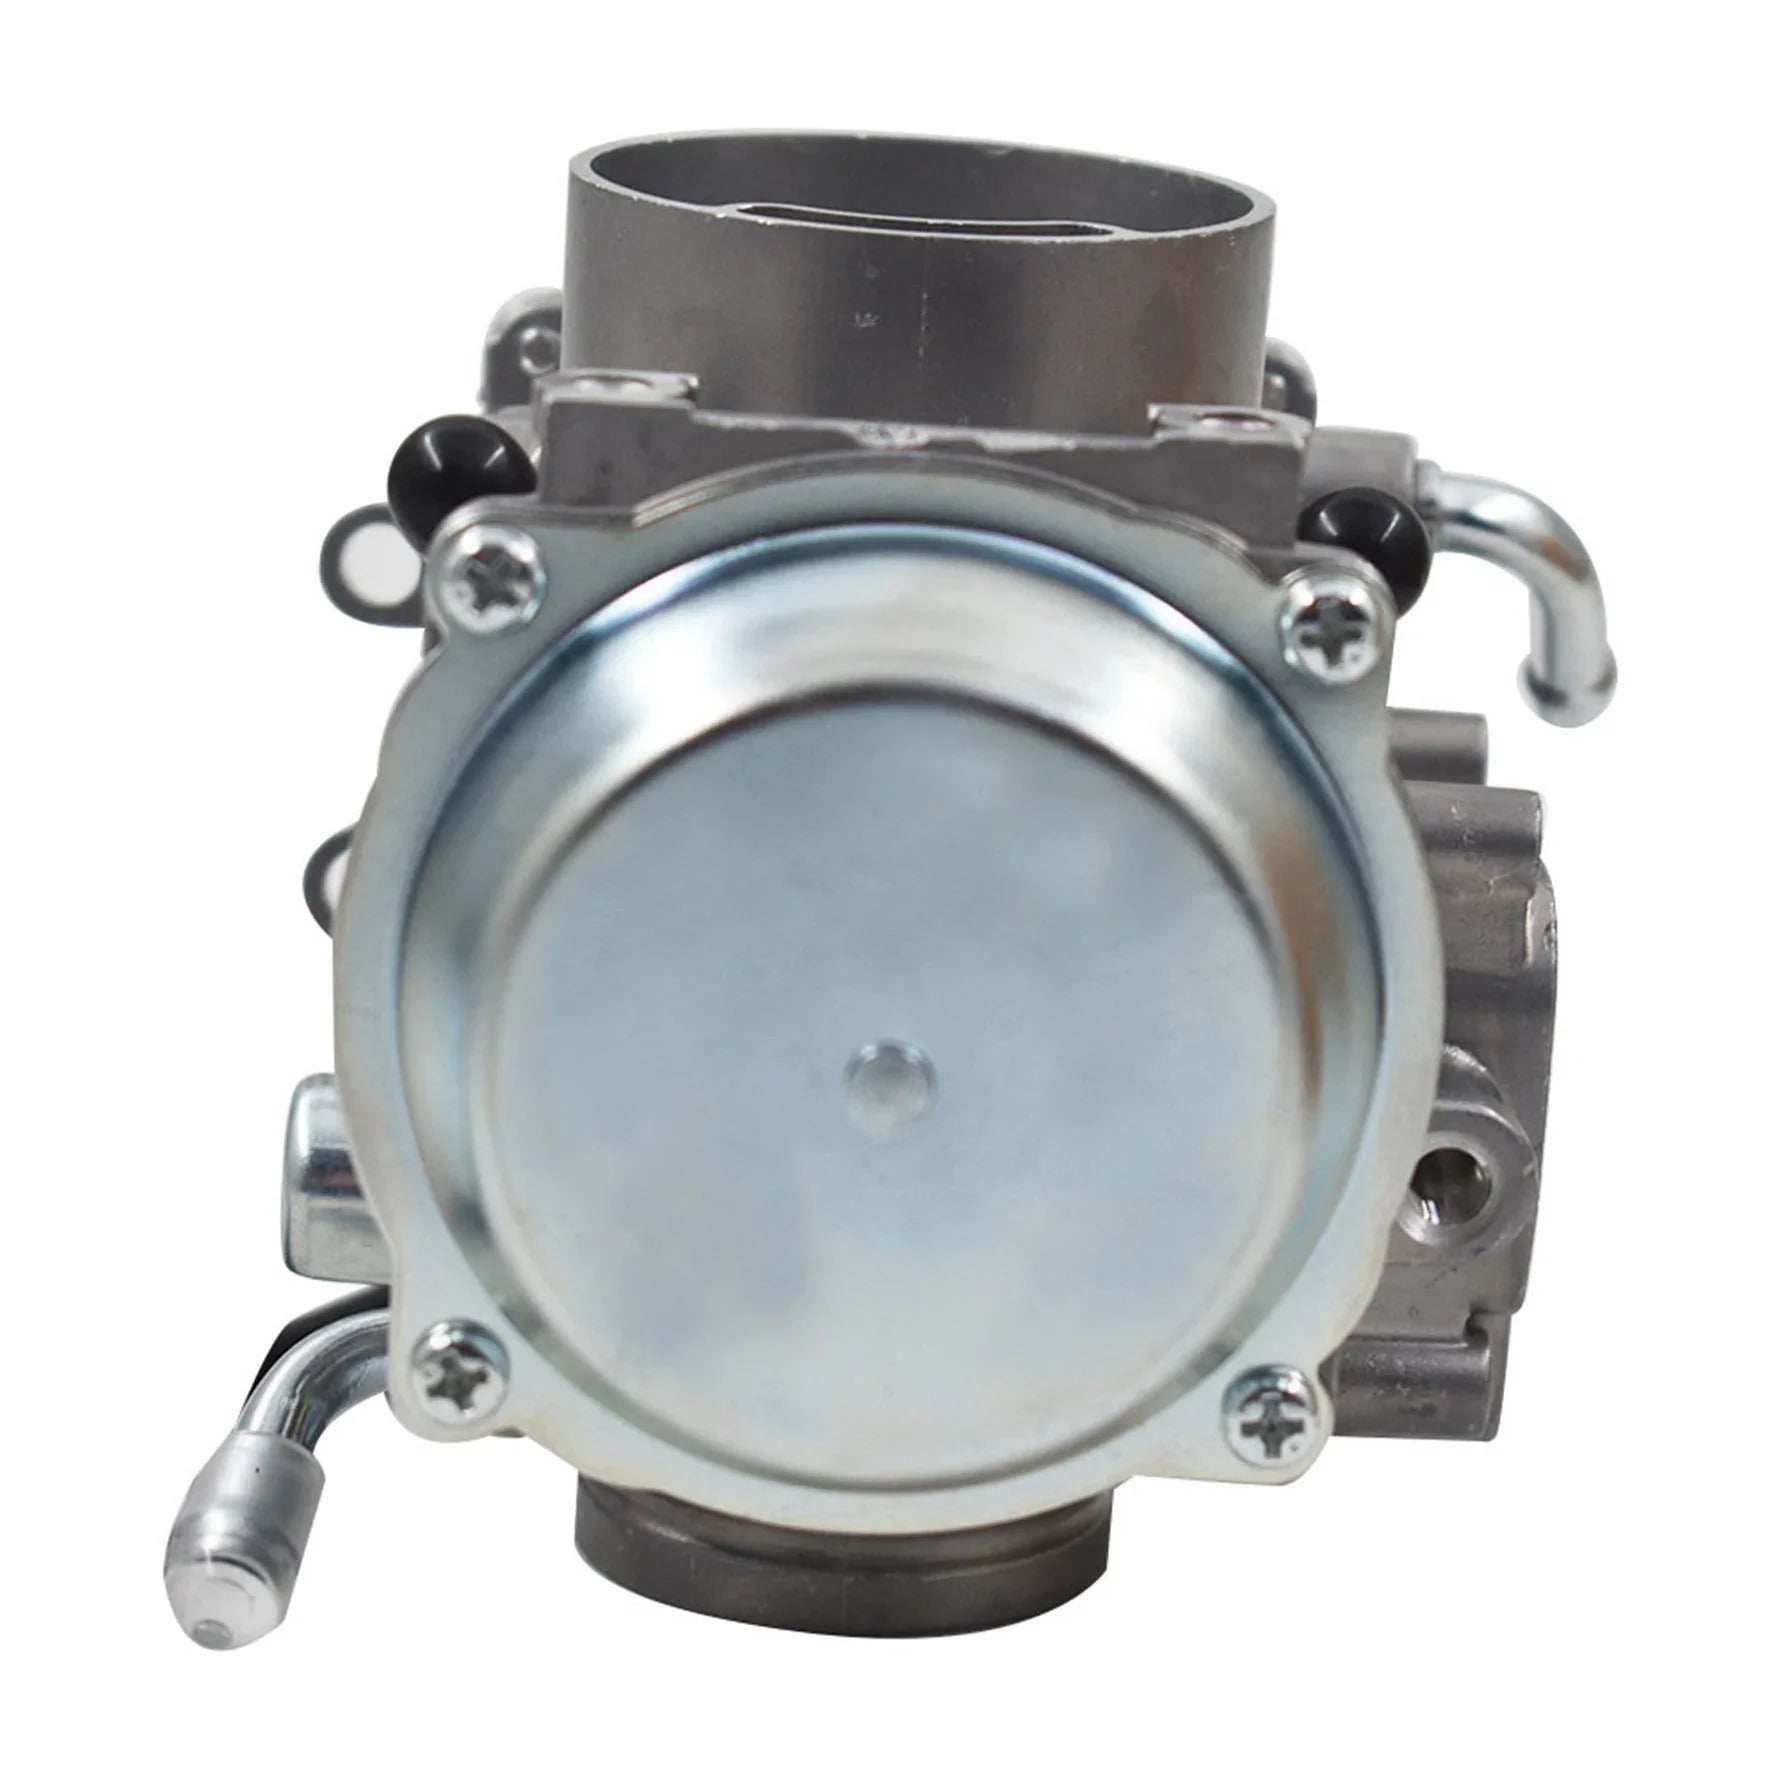 The replacement carburetor For Arctic Cat Bearcat 454 1996, 1997 2x4 and 4x4, 1998 2x4 and 4x4 LAB WORK MOTO